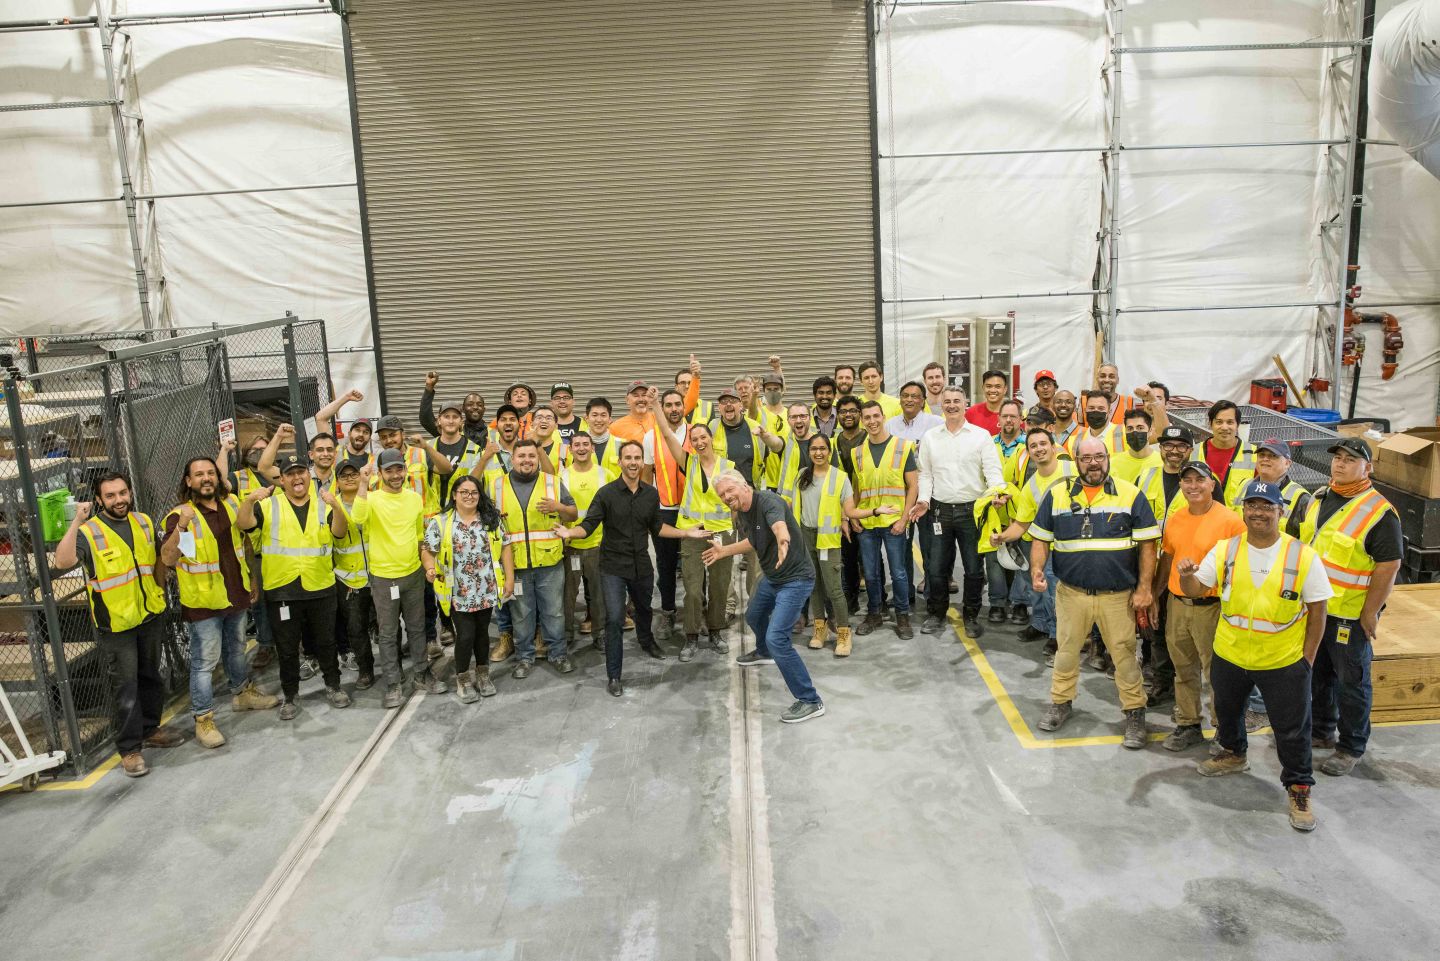 Richard Branson poses for a photo with the Virgin Hyperloop team